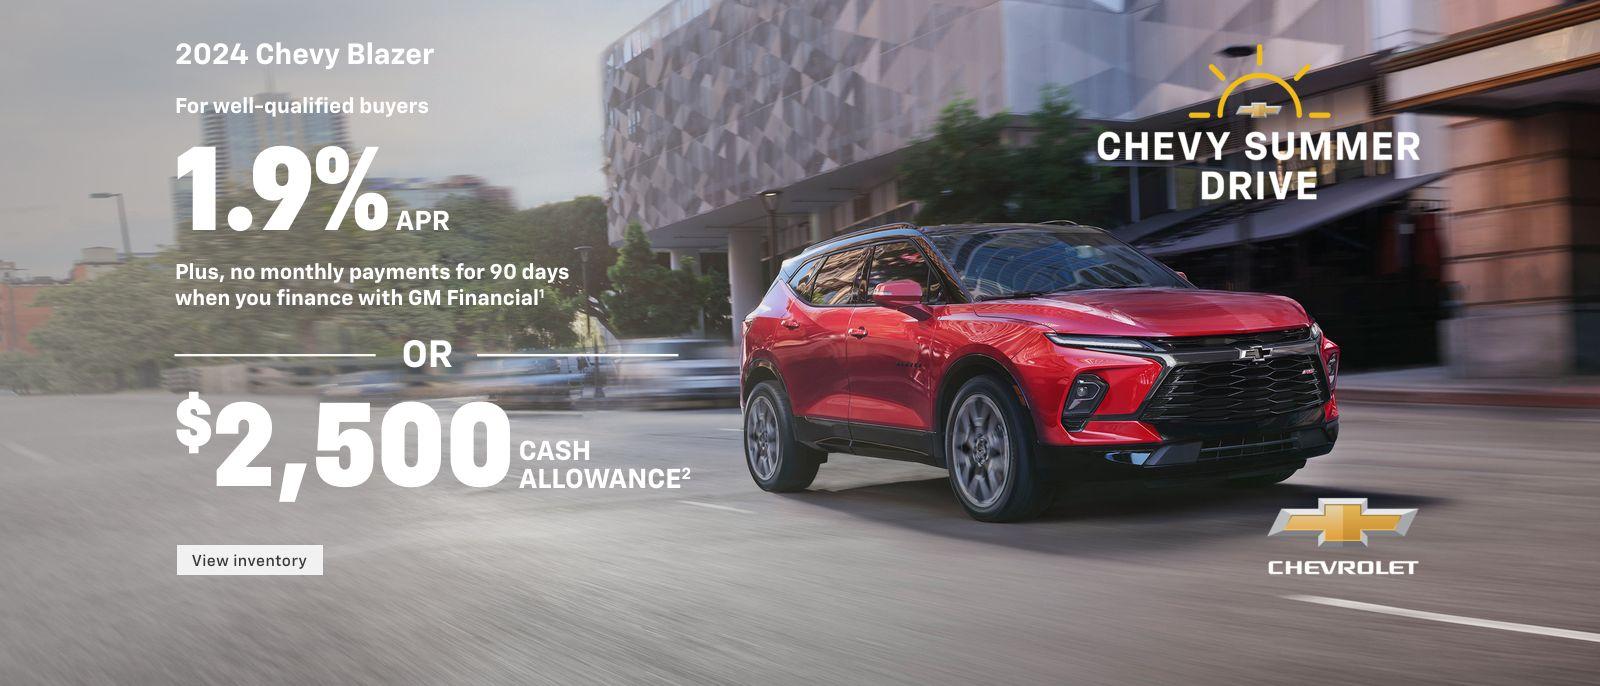 2024 Chevy Blazer. Have a standout summer. For well-qualified buyers 1.9% APR + No monthly payments for 90 days when you finance with GM Financial. Or, $2,500 cash allowance.